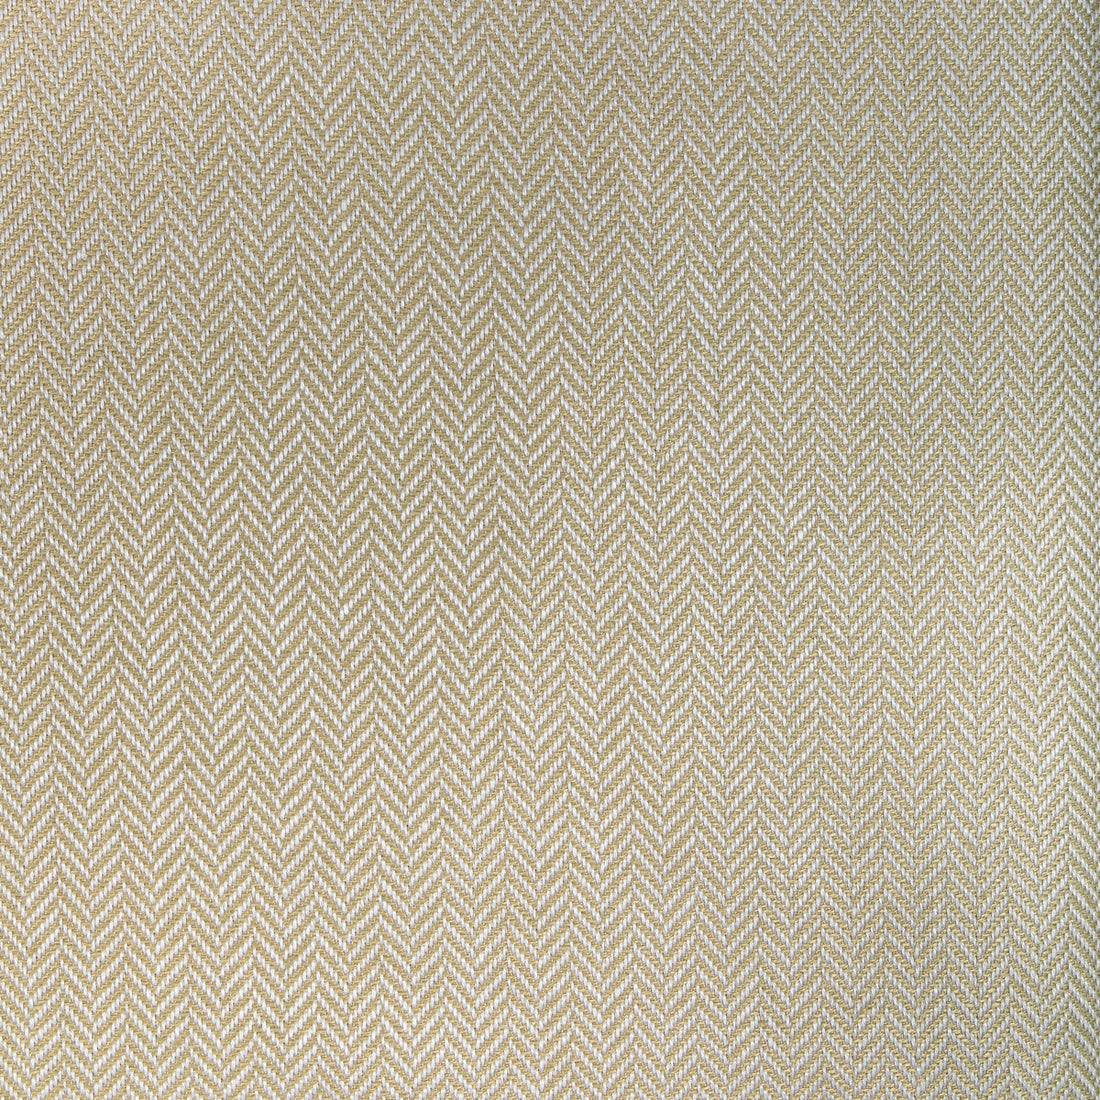 Kerolay Linen Weave fabric in wheat color - pattern 8022107.16.0 - by Brunschwig &amp; Fils in the Lorient Weaves collection